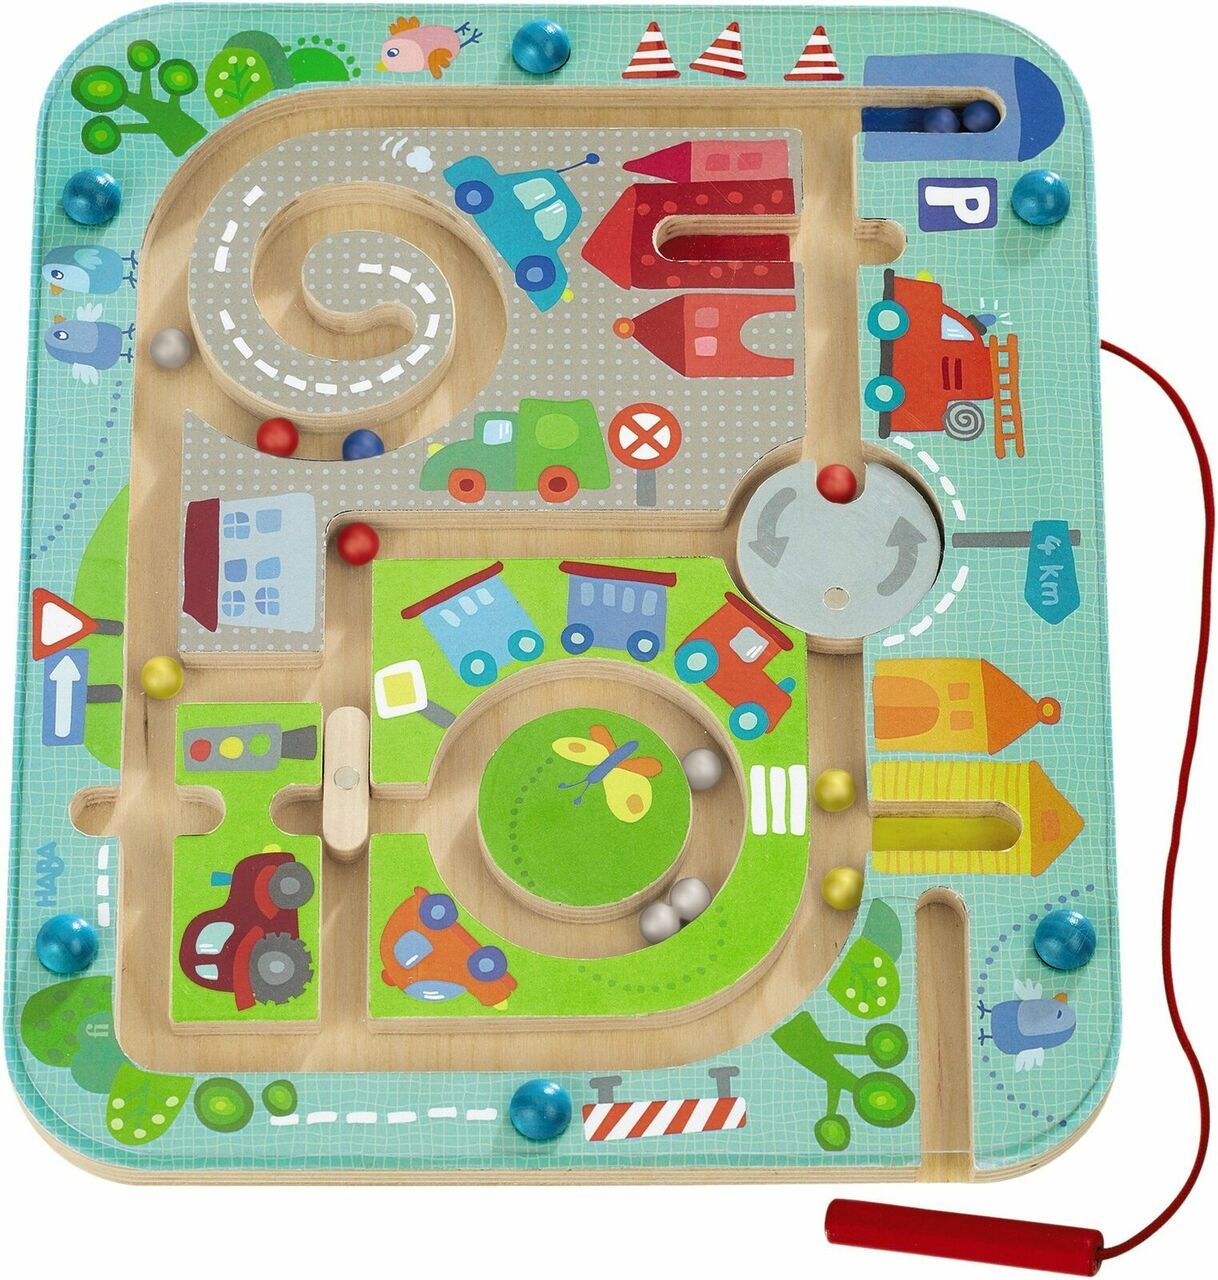 HABA Magnetic Town Maze Game - Wood Wood Toys Canada's Favourite Montessori Toy Store